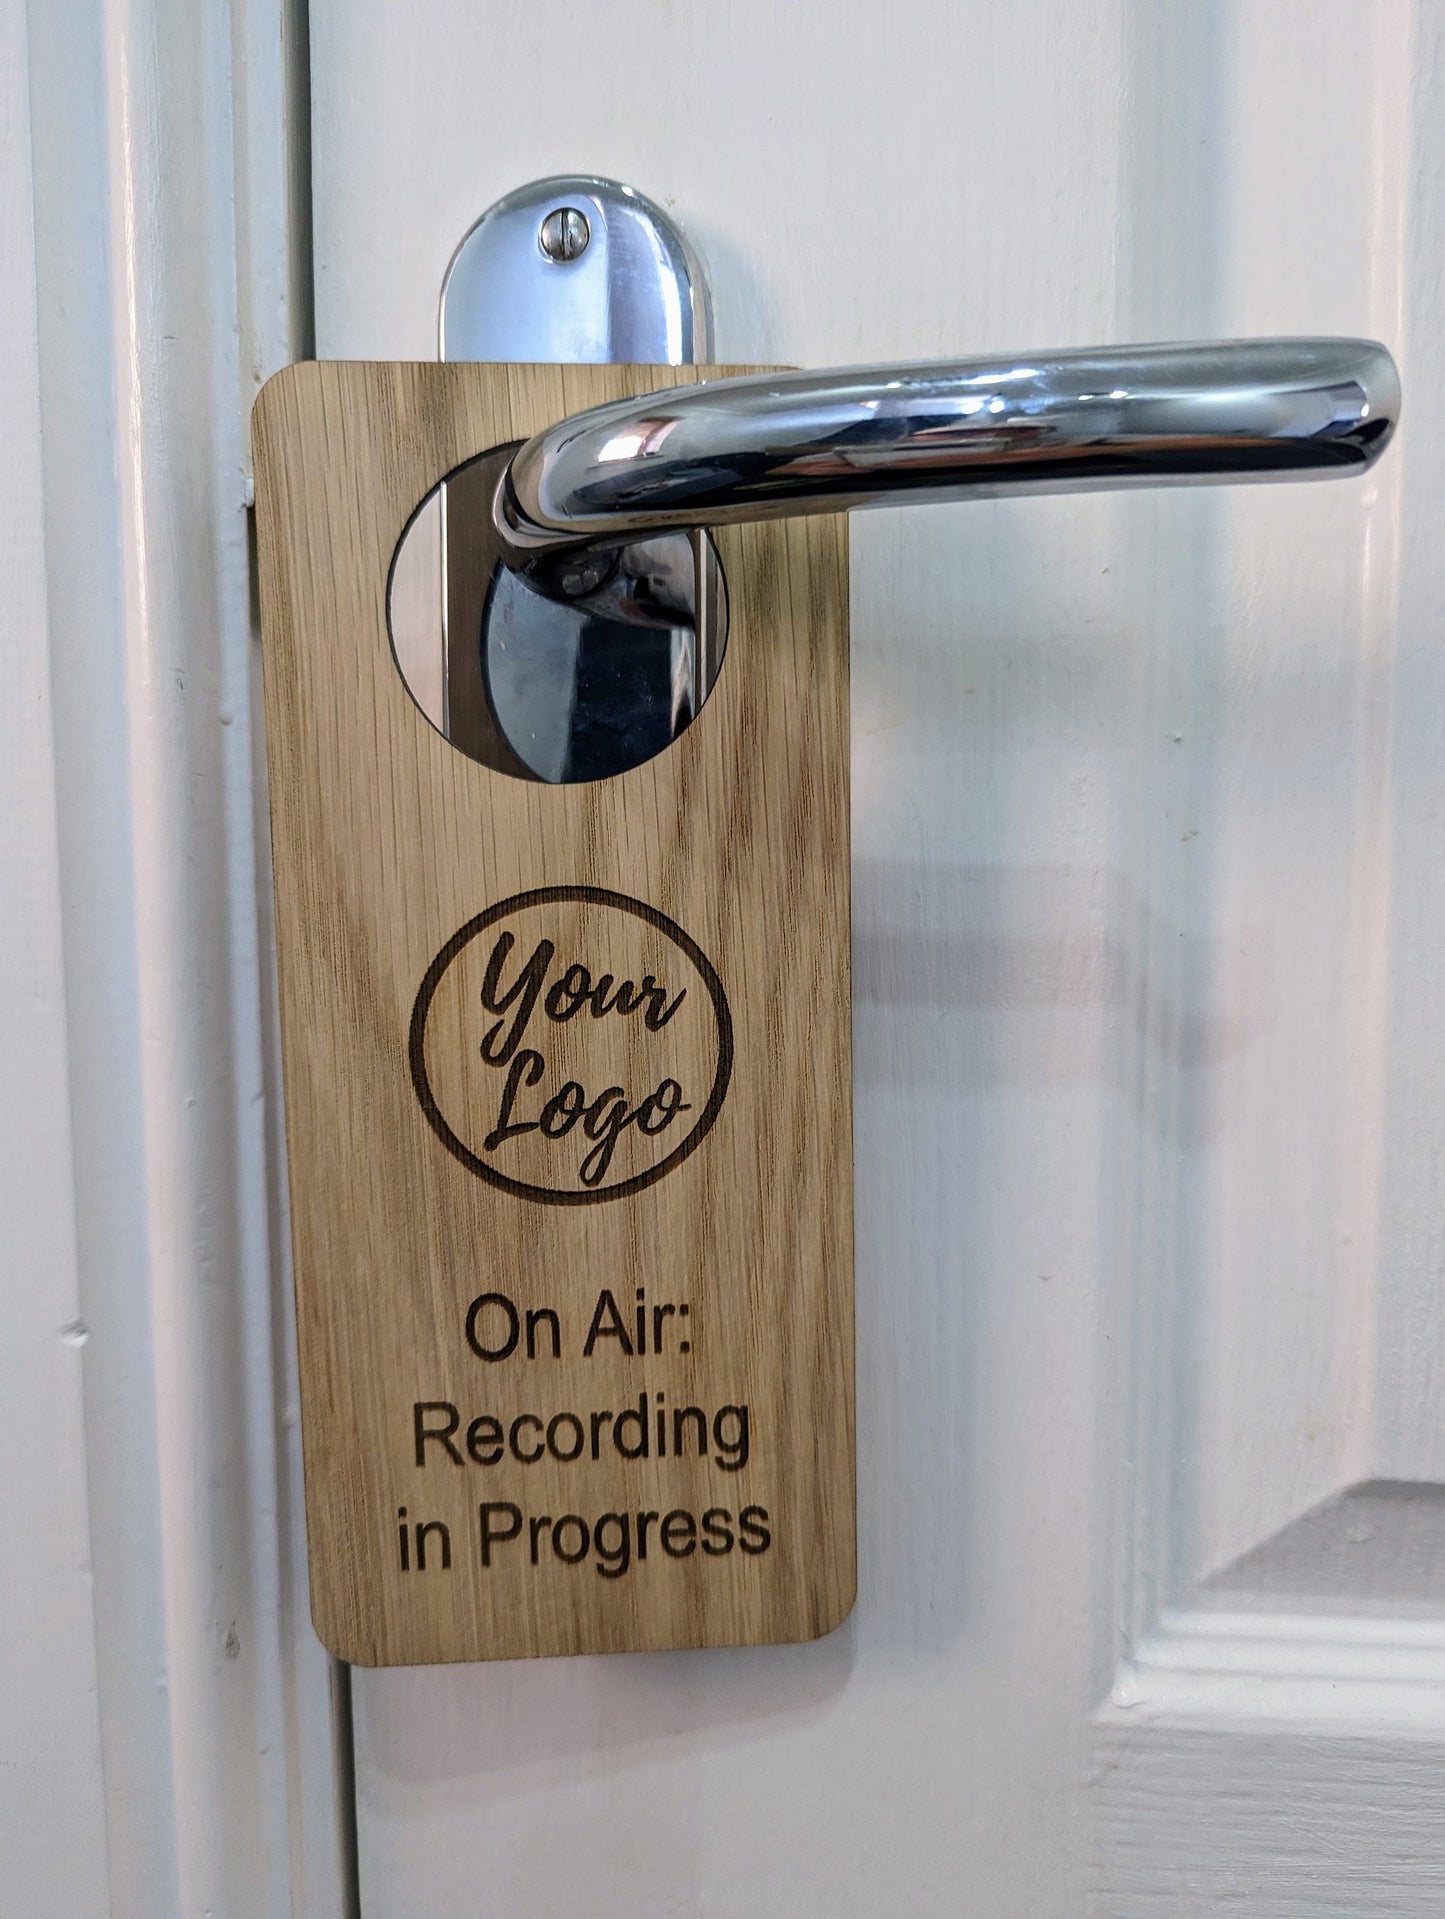 On Air: Recording in Progress, Do Not Disturb - Wooden Door Hanger, Personalised Sign,  Podcaster, Musician, Voice-over, or Content Creator